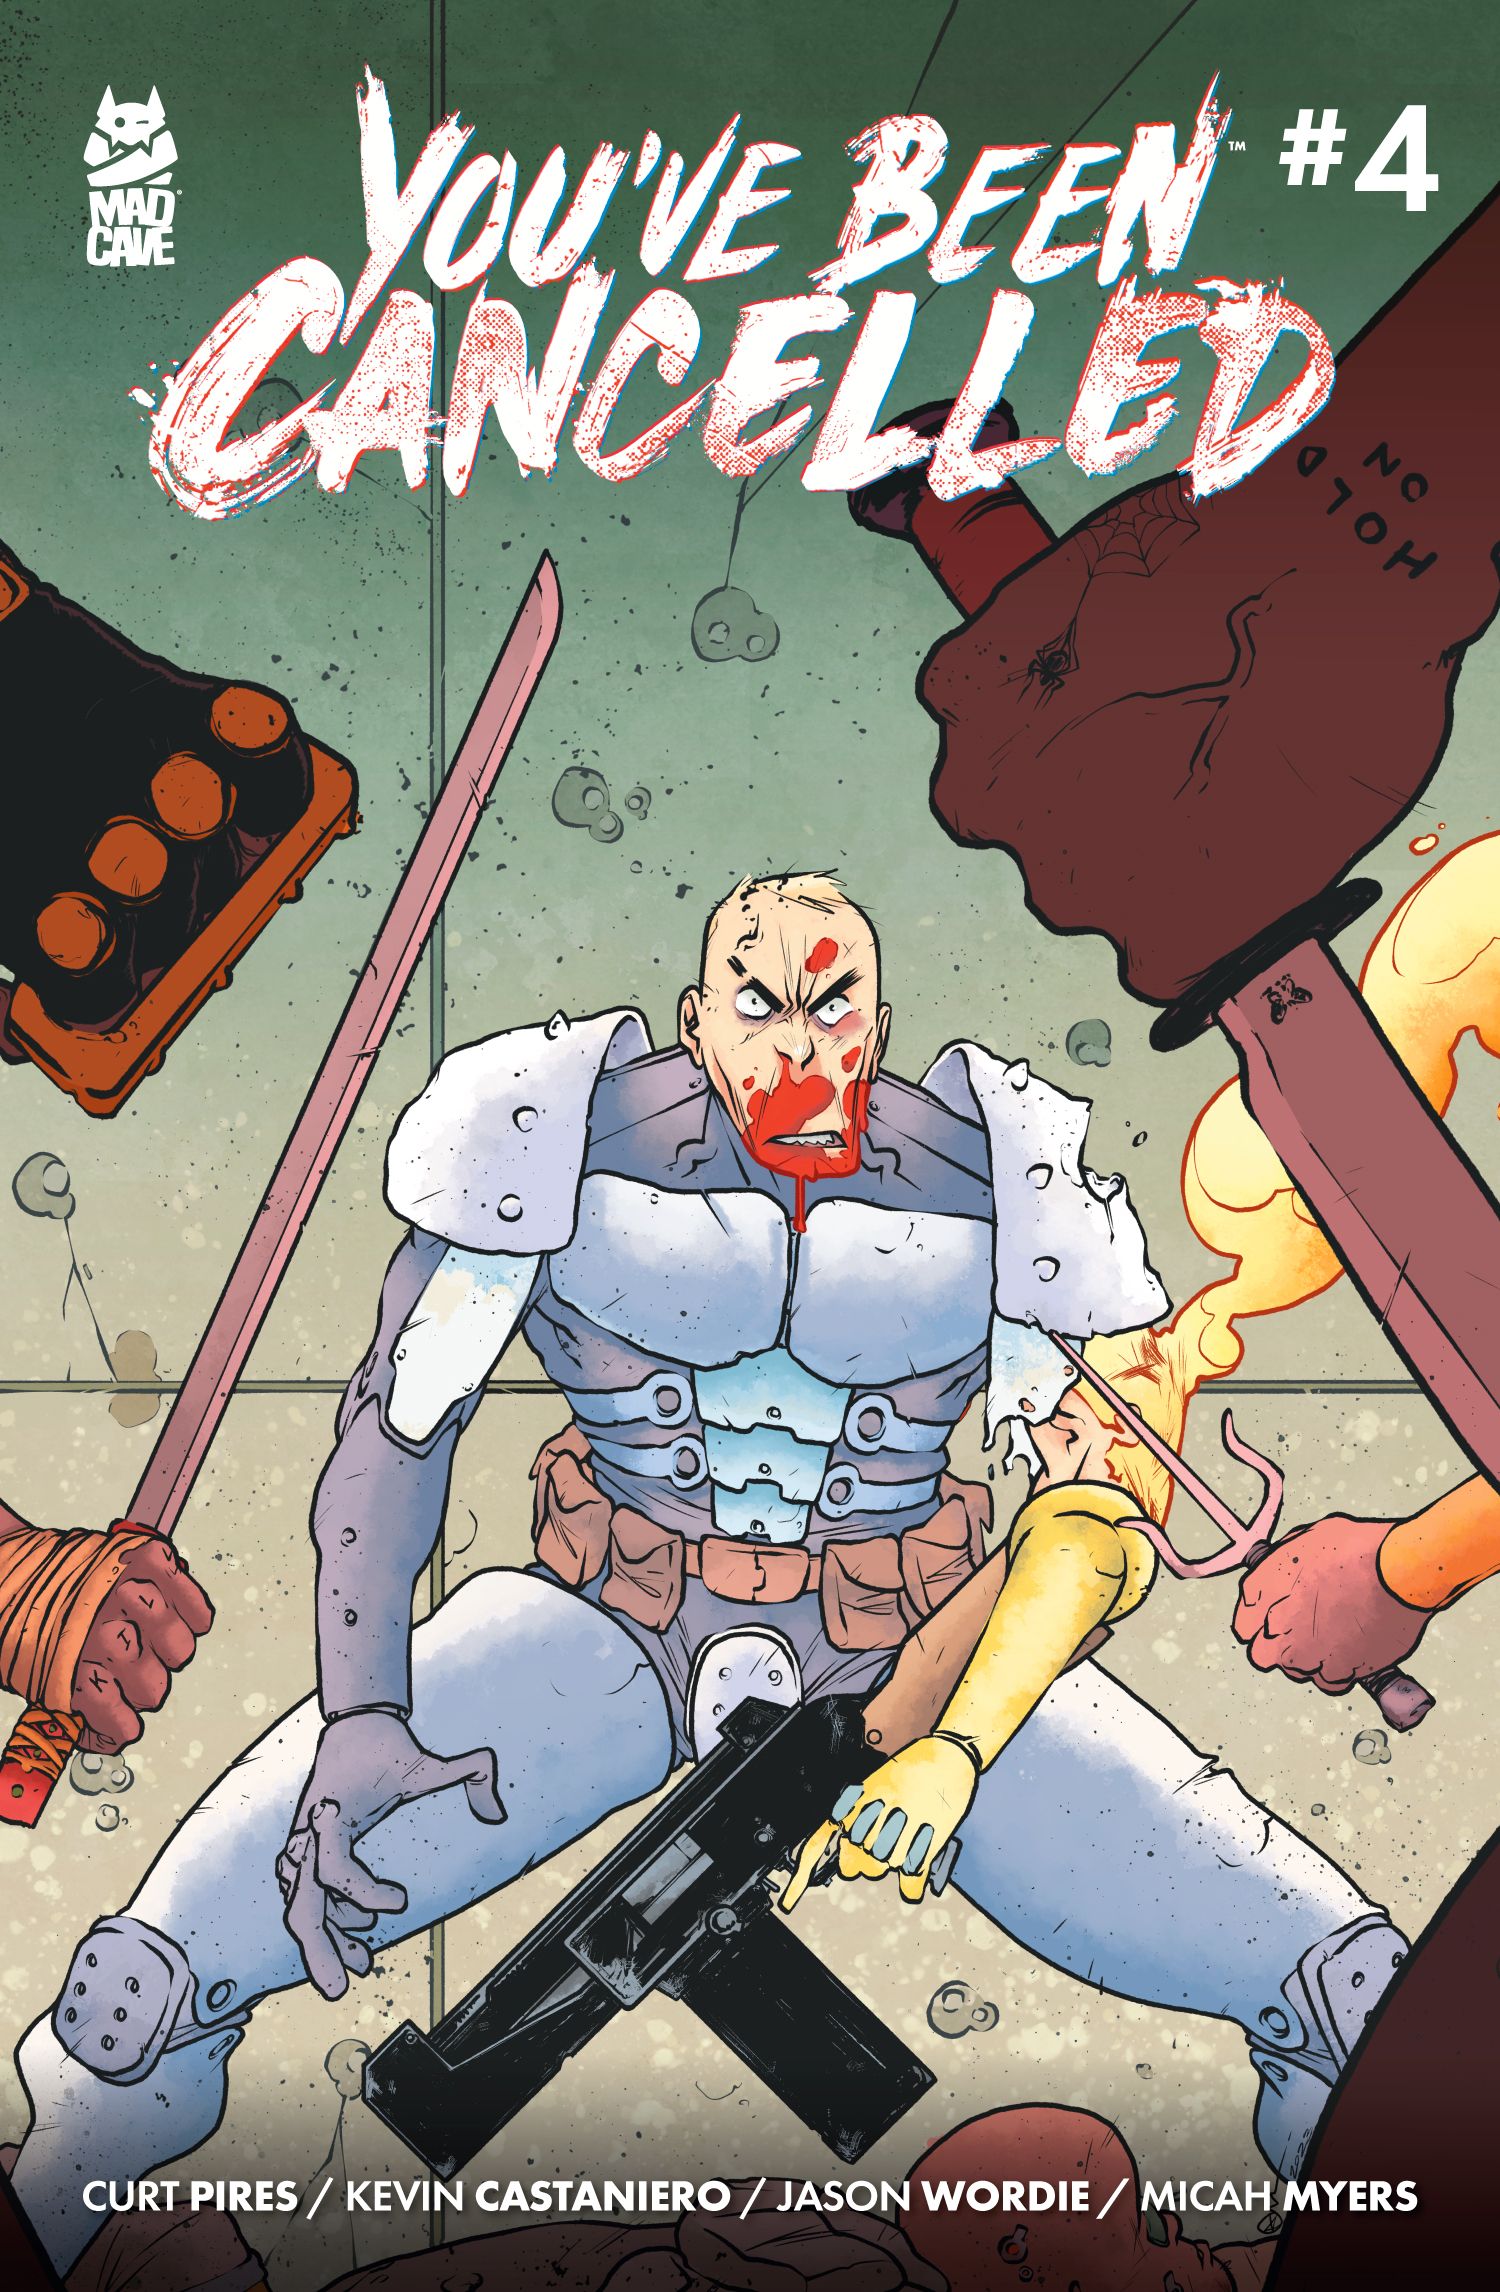 You've Been Cancelled #4 Comic